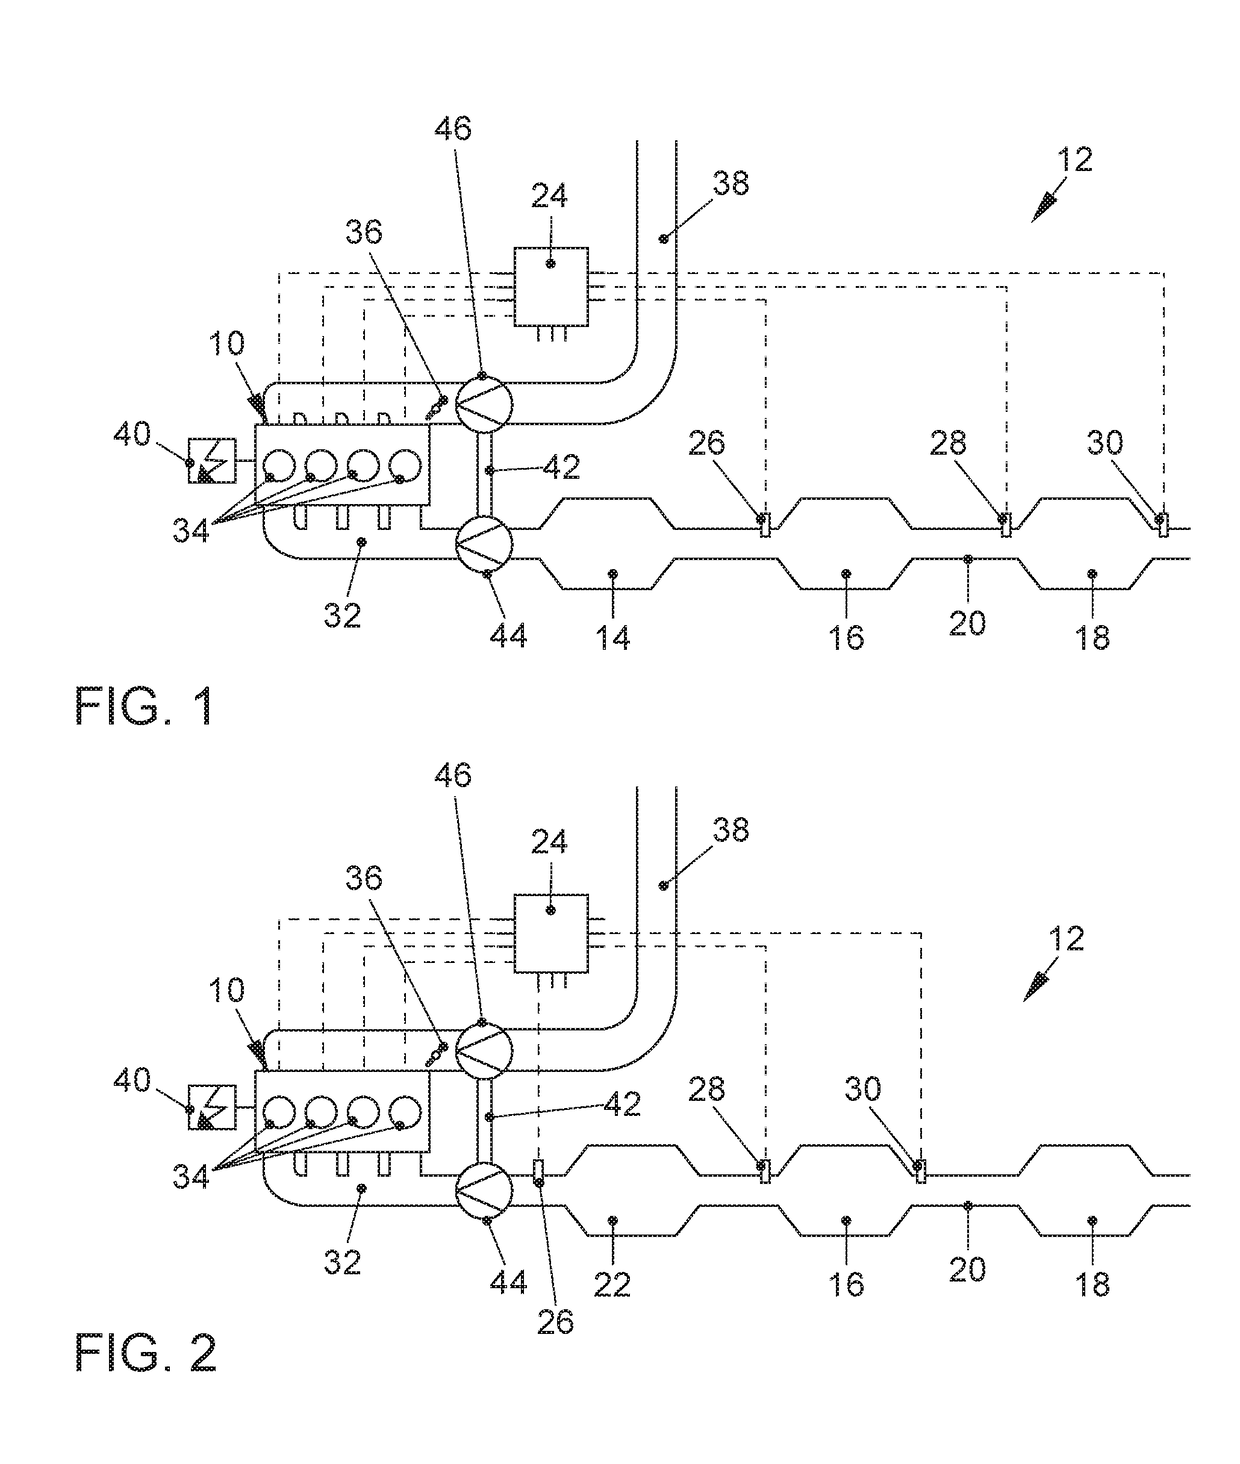 Regeneration of a particulate filter or four-way catalytic converter in an exhaust system of an internal combustion engine